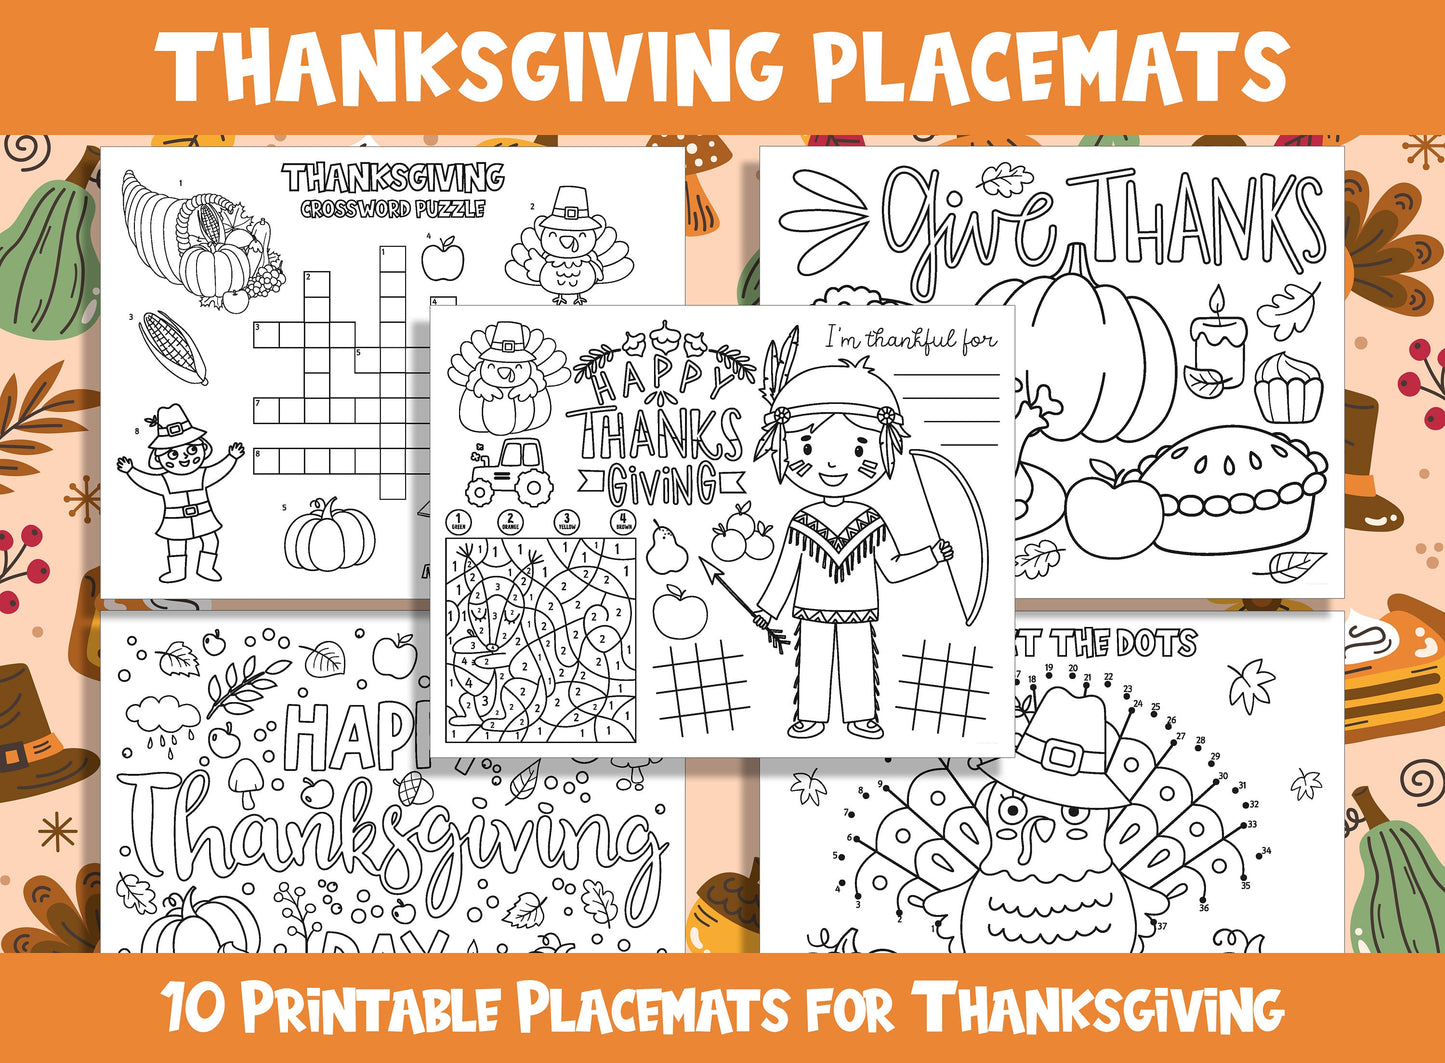 Printable Thanksgiving Placemats - 10 Fun & Educational Pages for Kids, PDF File, US Letter Size, Instant Download